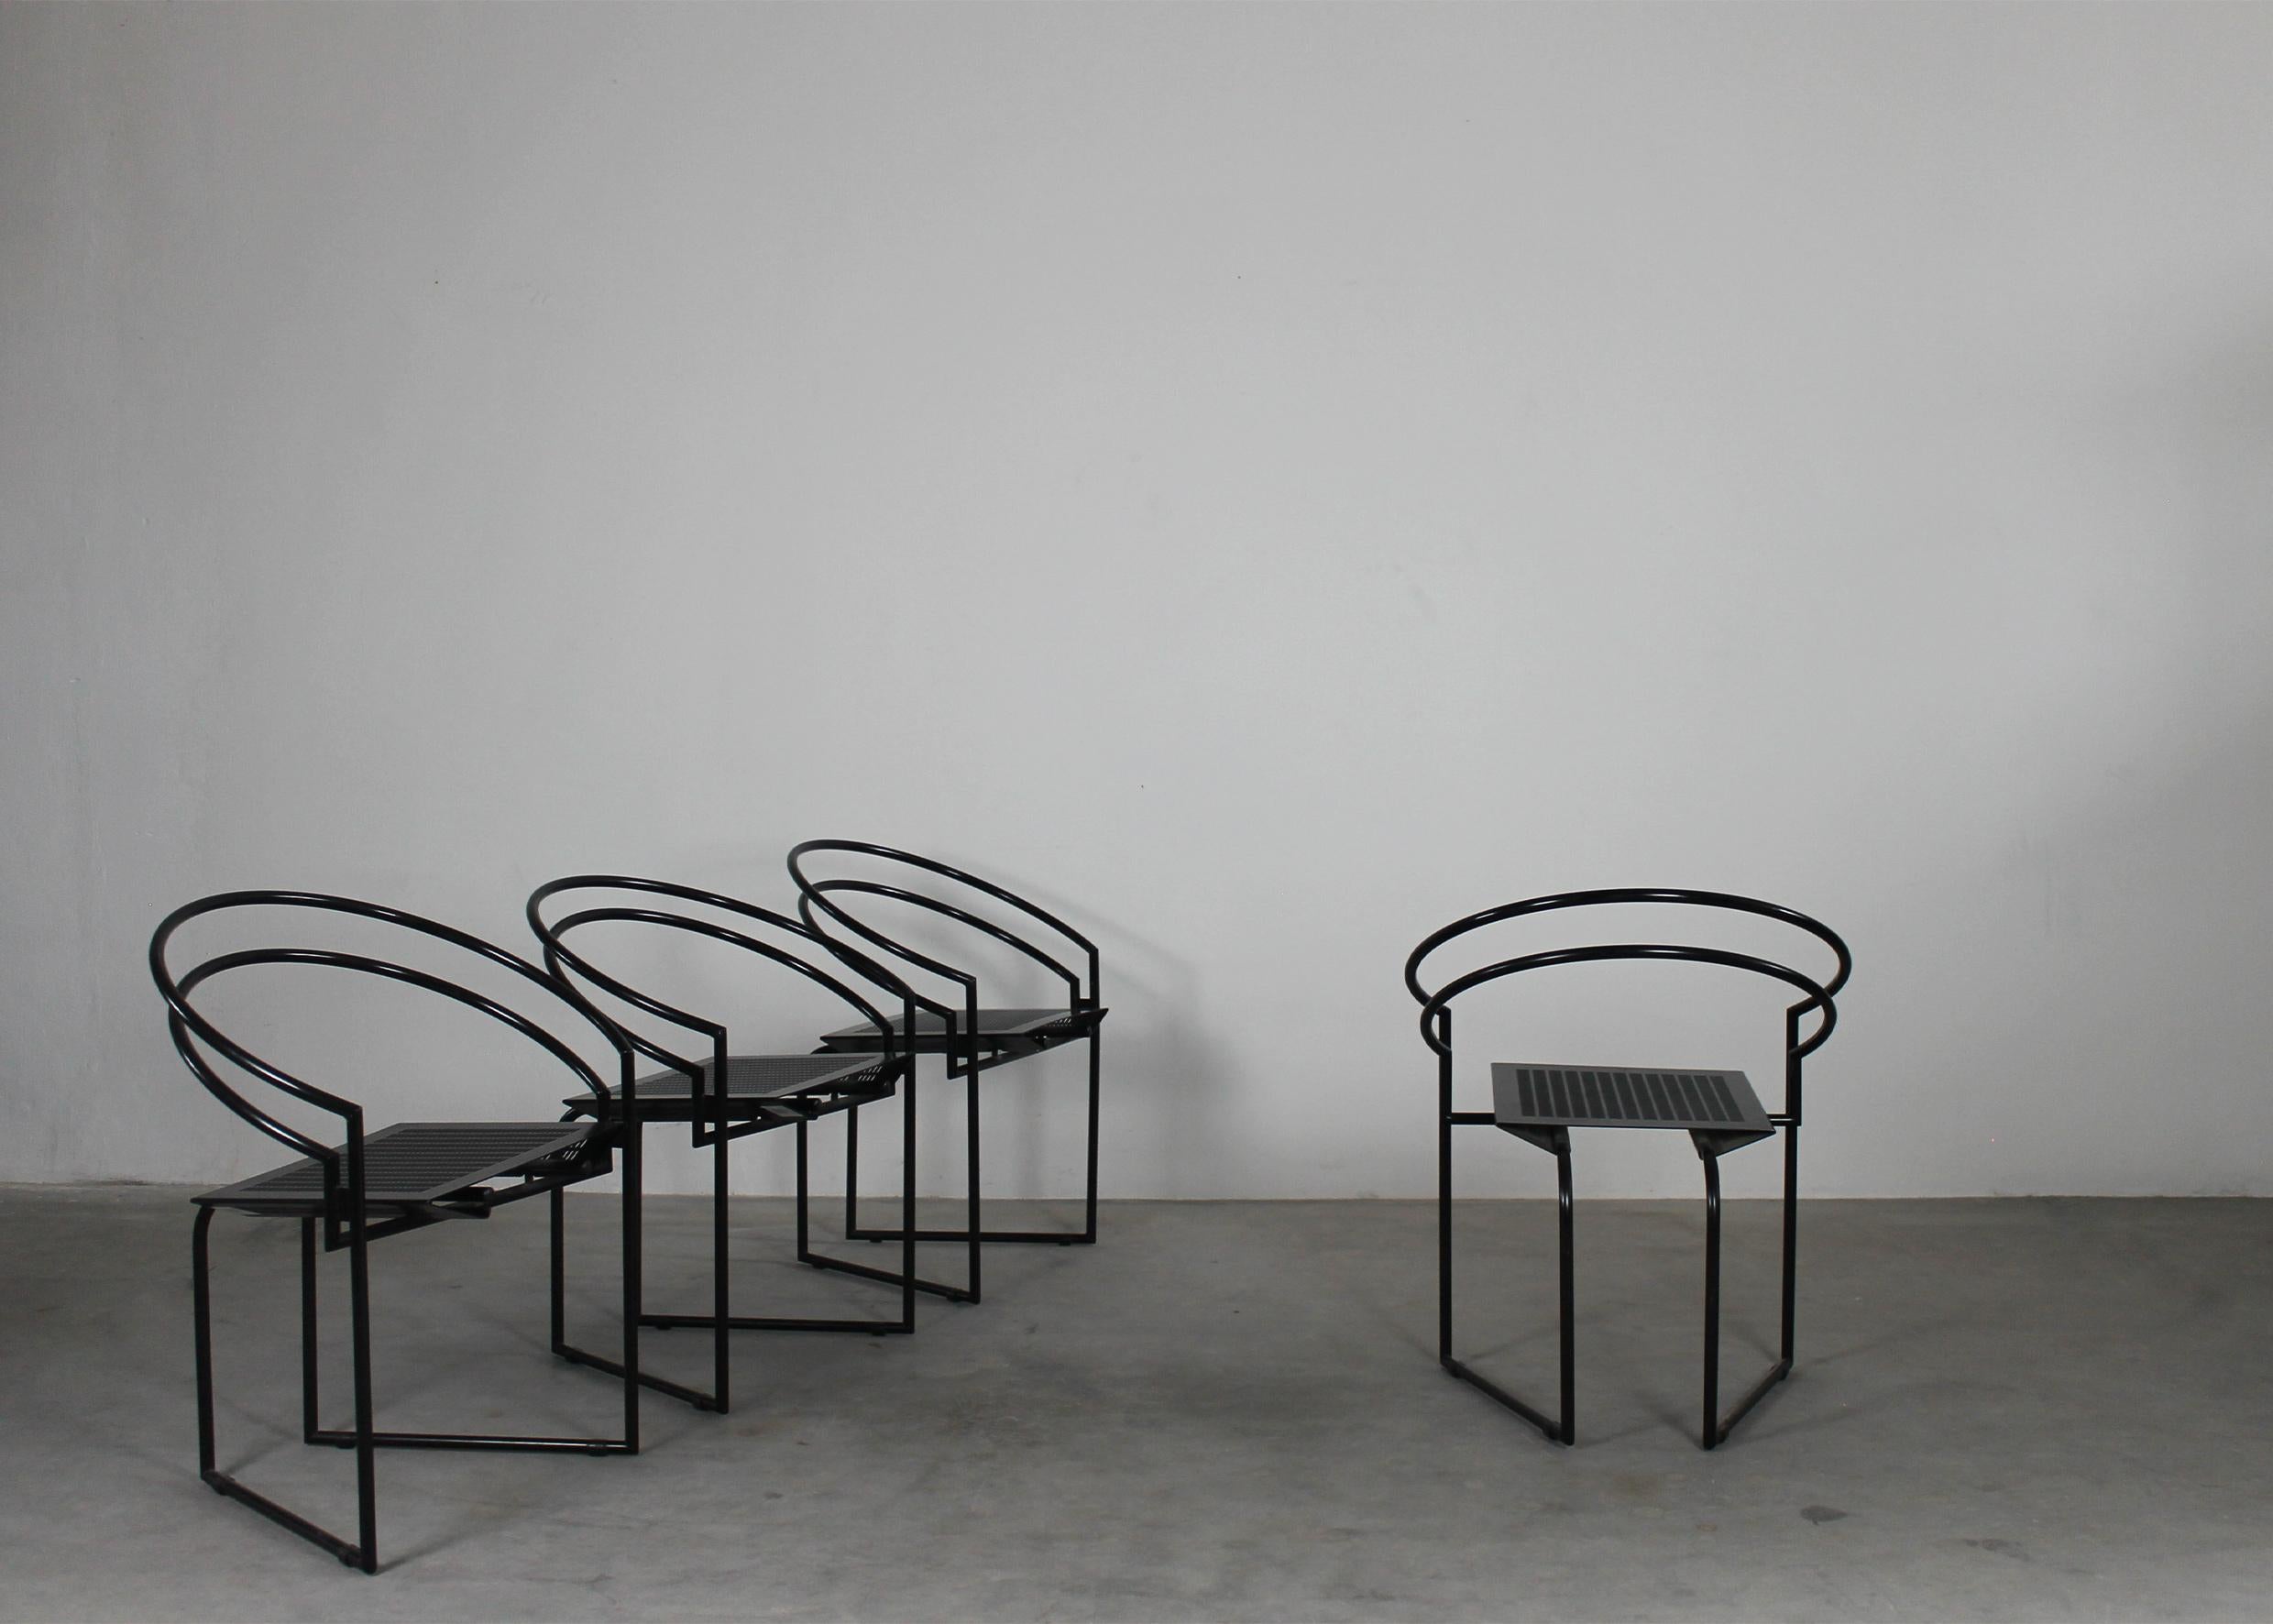 Post-Modern Mario Botta Set of Four 614 or La Tonda Chairs in Black Lacquered Steel by Alias